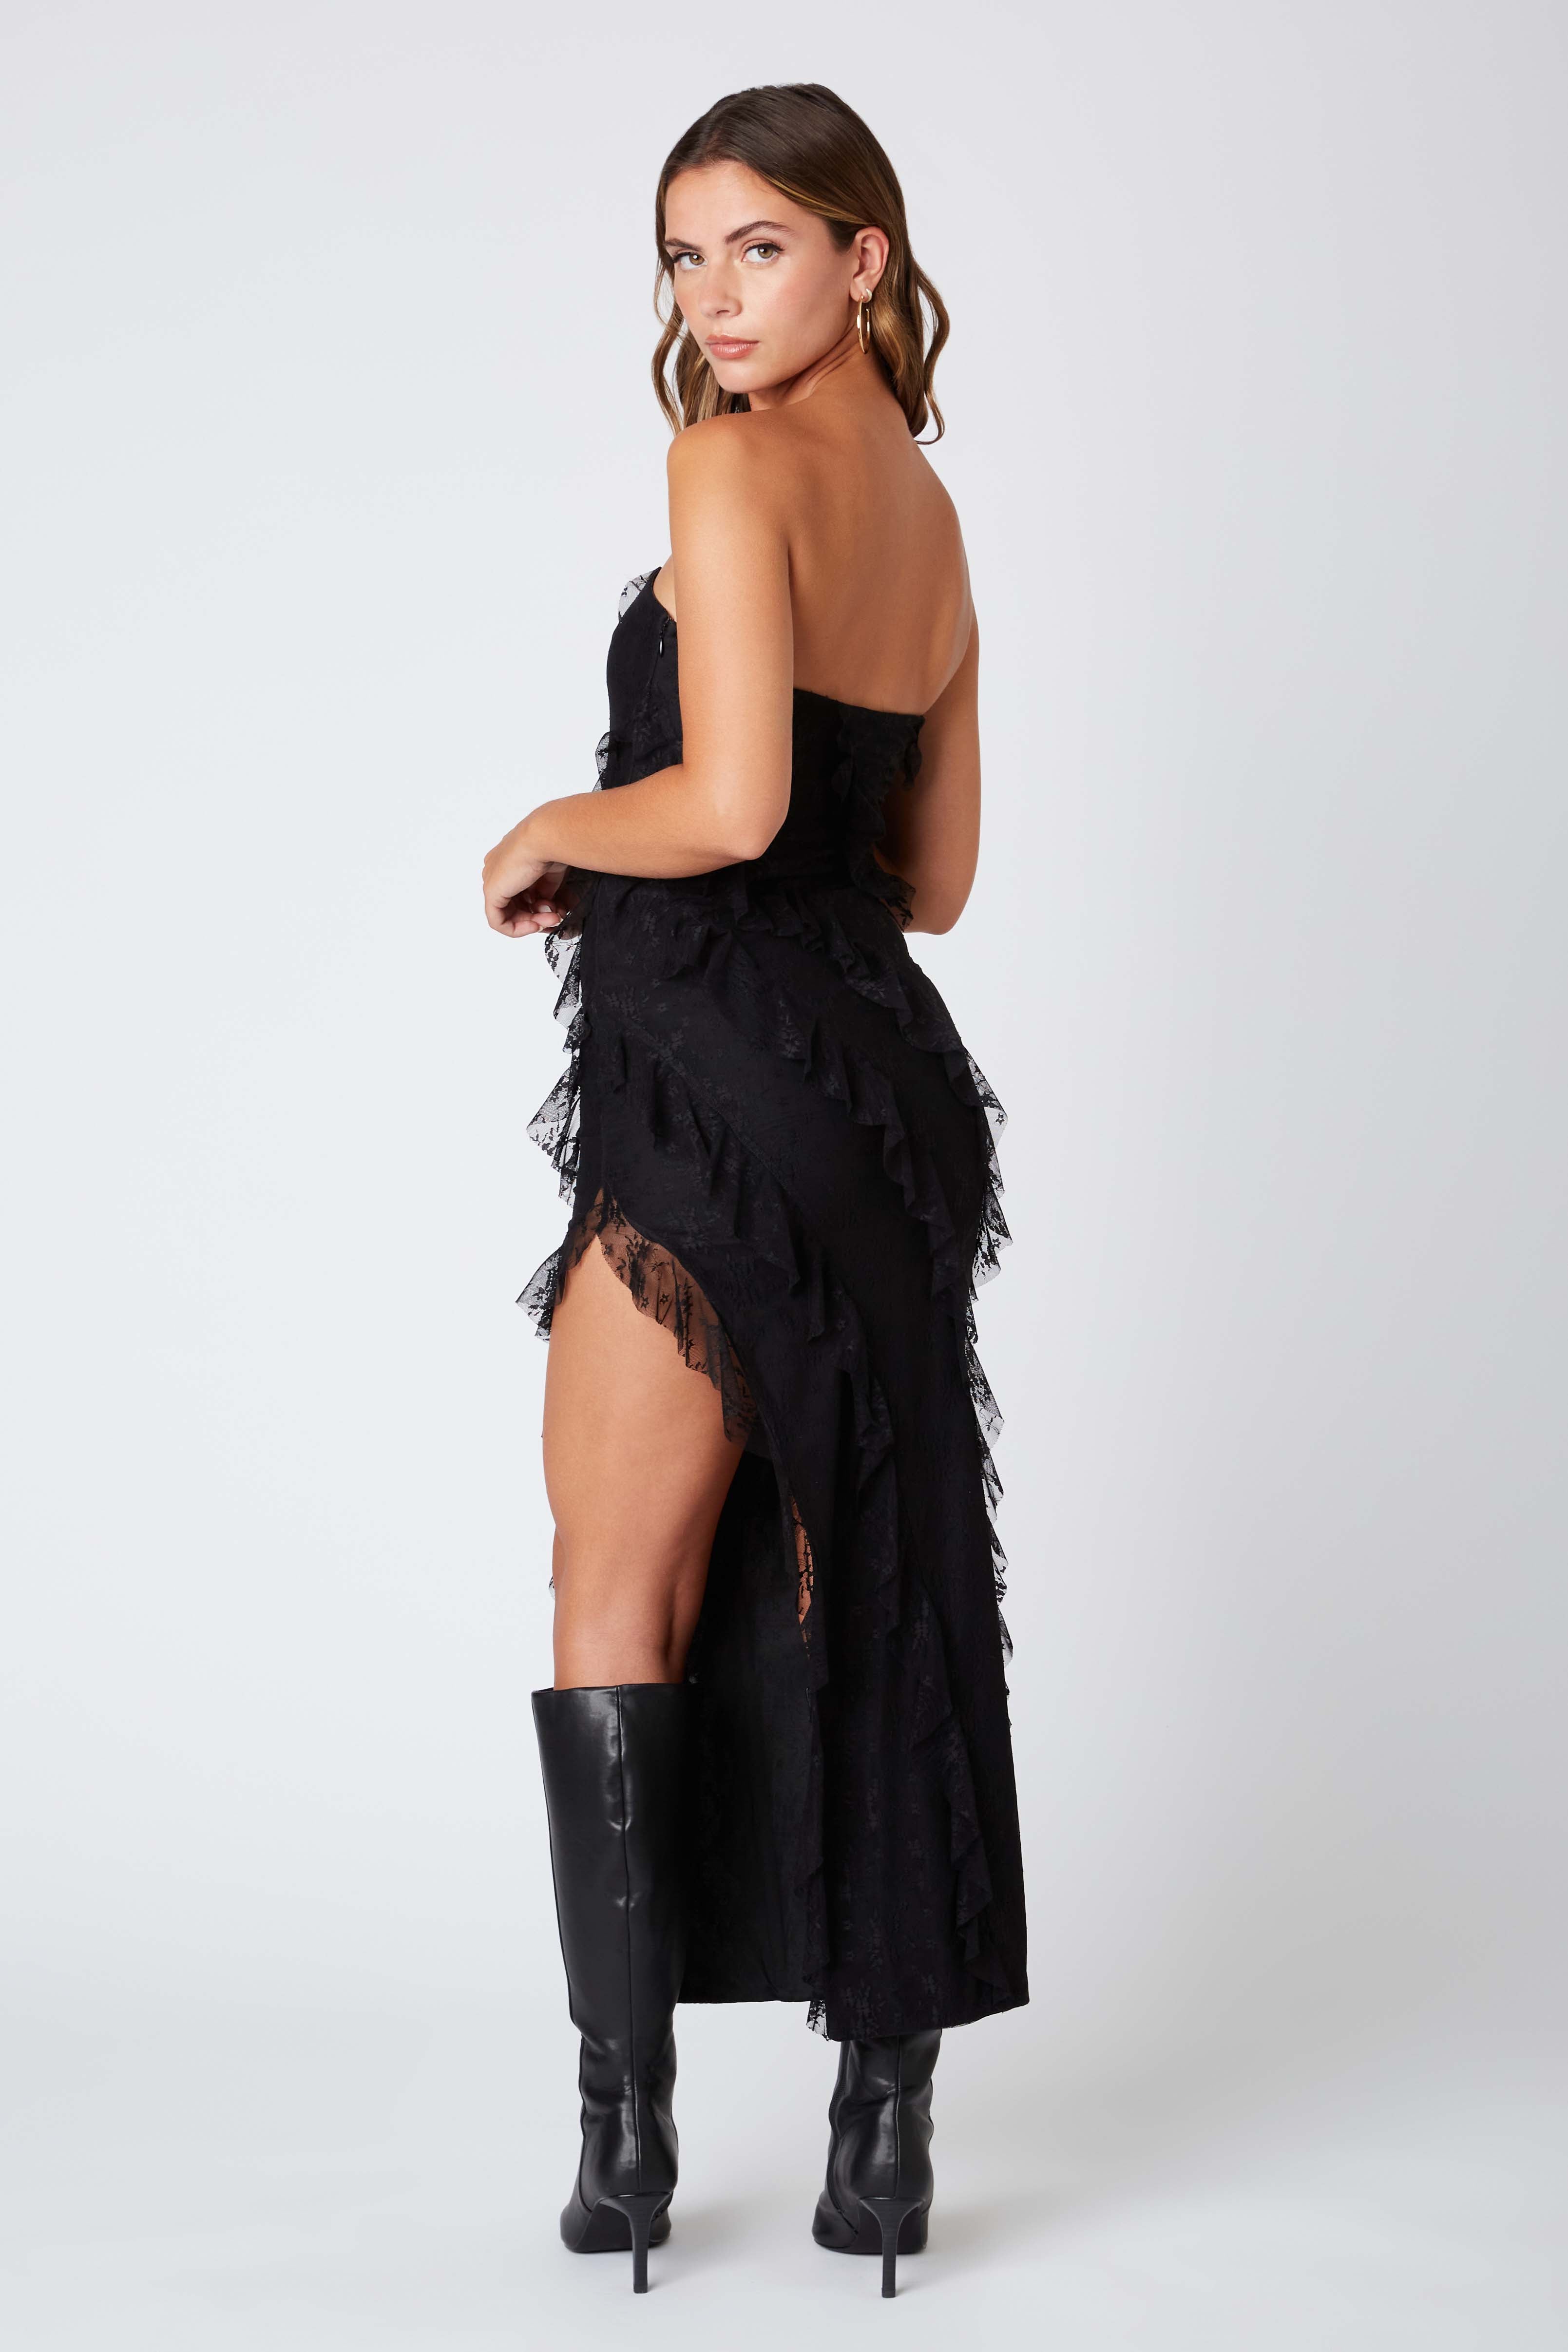 Lace Strapless Maxi Dress in Black Back View